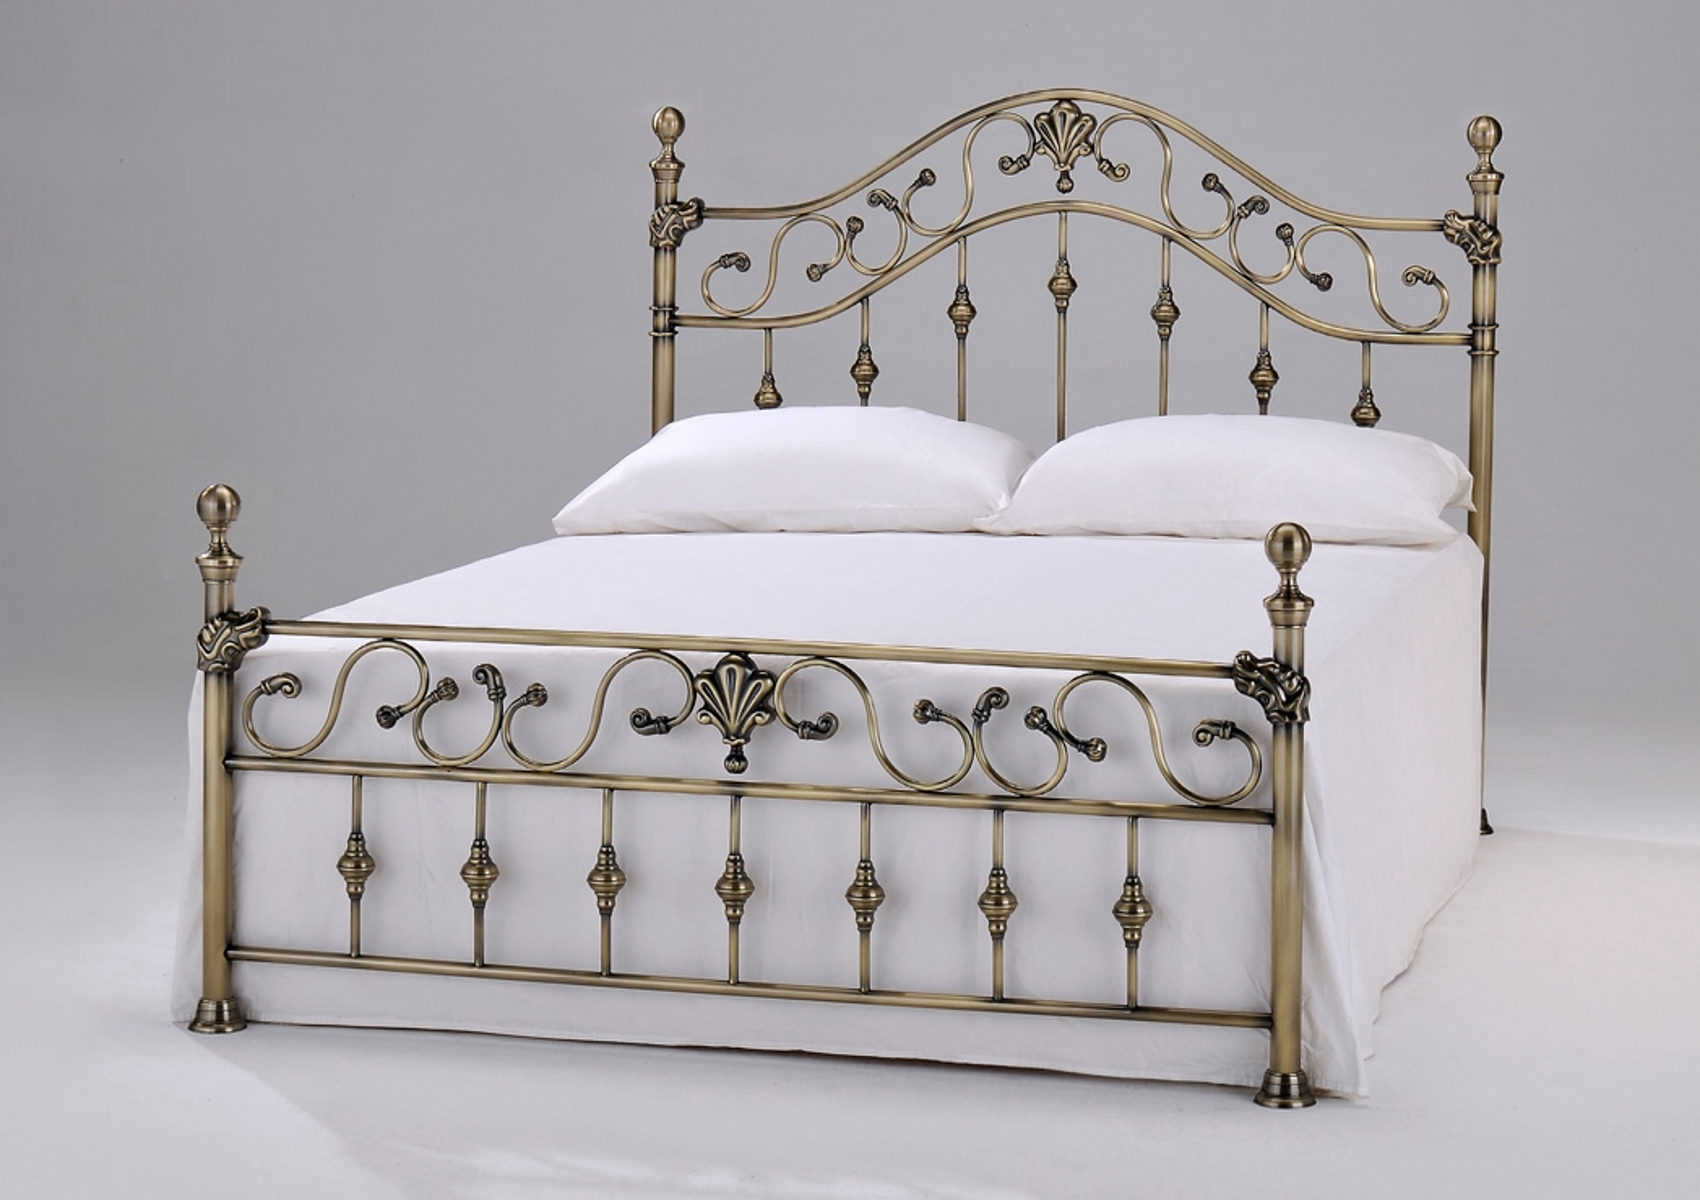 View Harmony Antique Brass Metal Double Bed Time4Sleep information